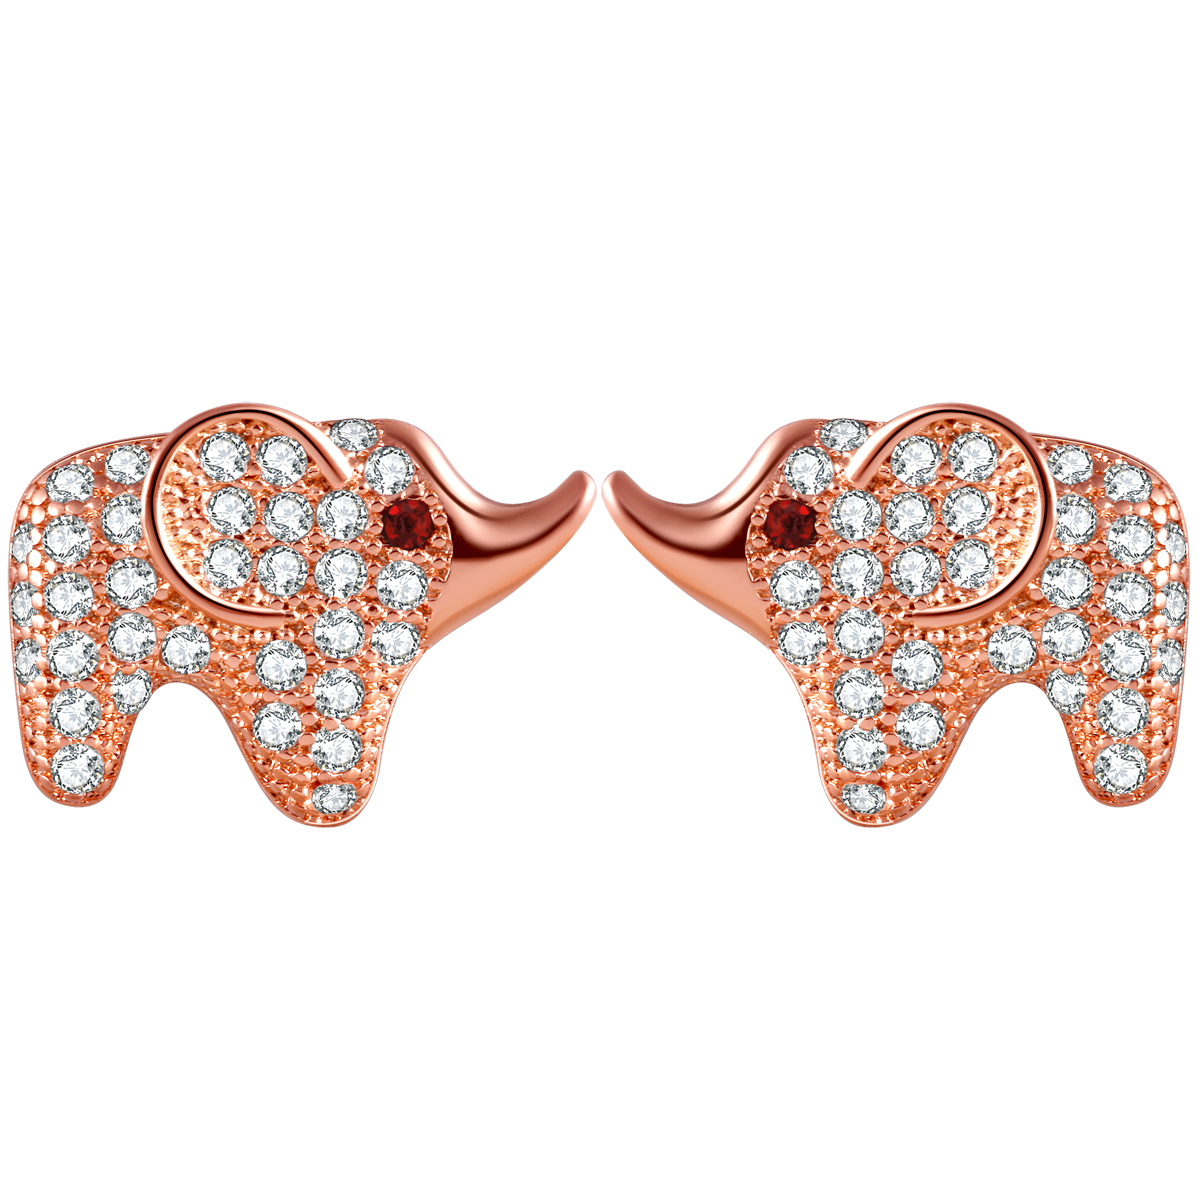 Funshop Alloy Cute Elephant Ear Studs With Full Cz Pave In 2 Colors